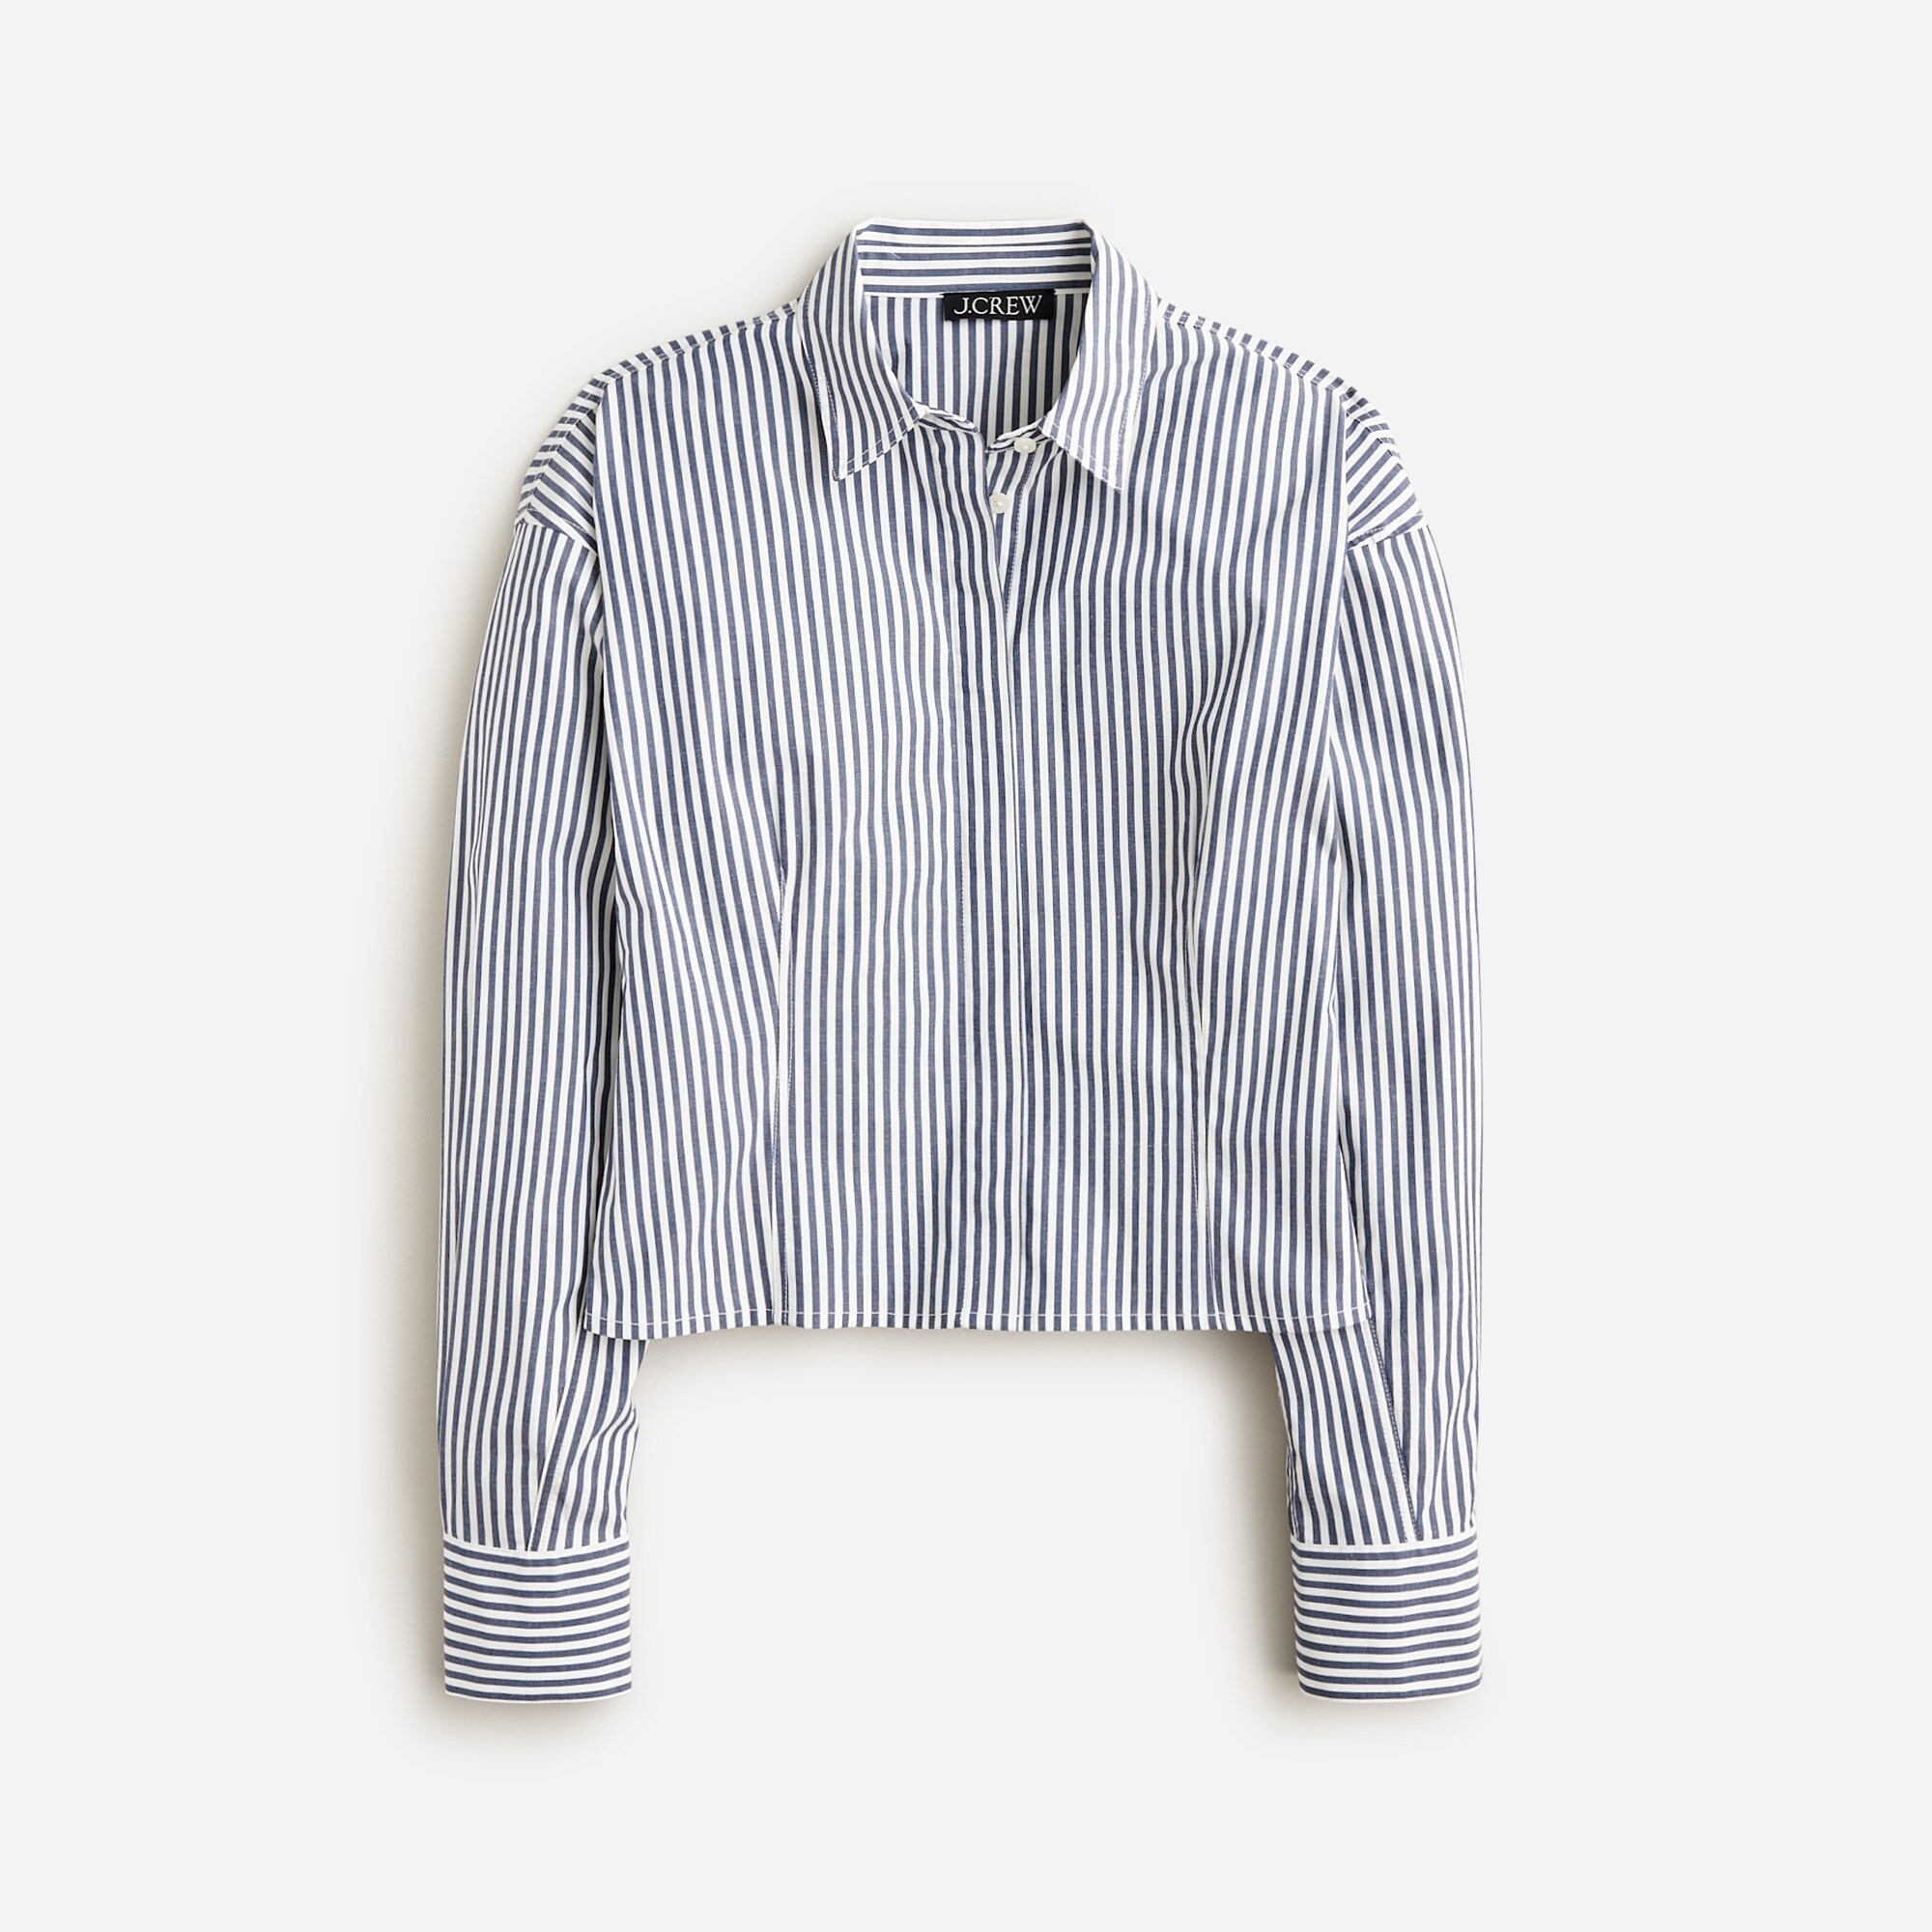  Fitted button-up shirt in striped stretch cotton poplin